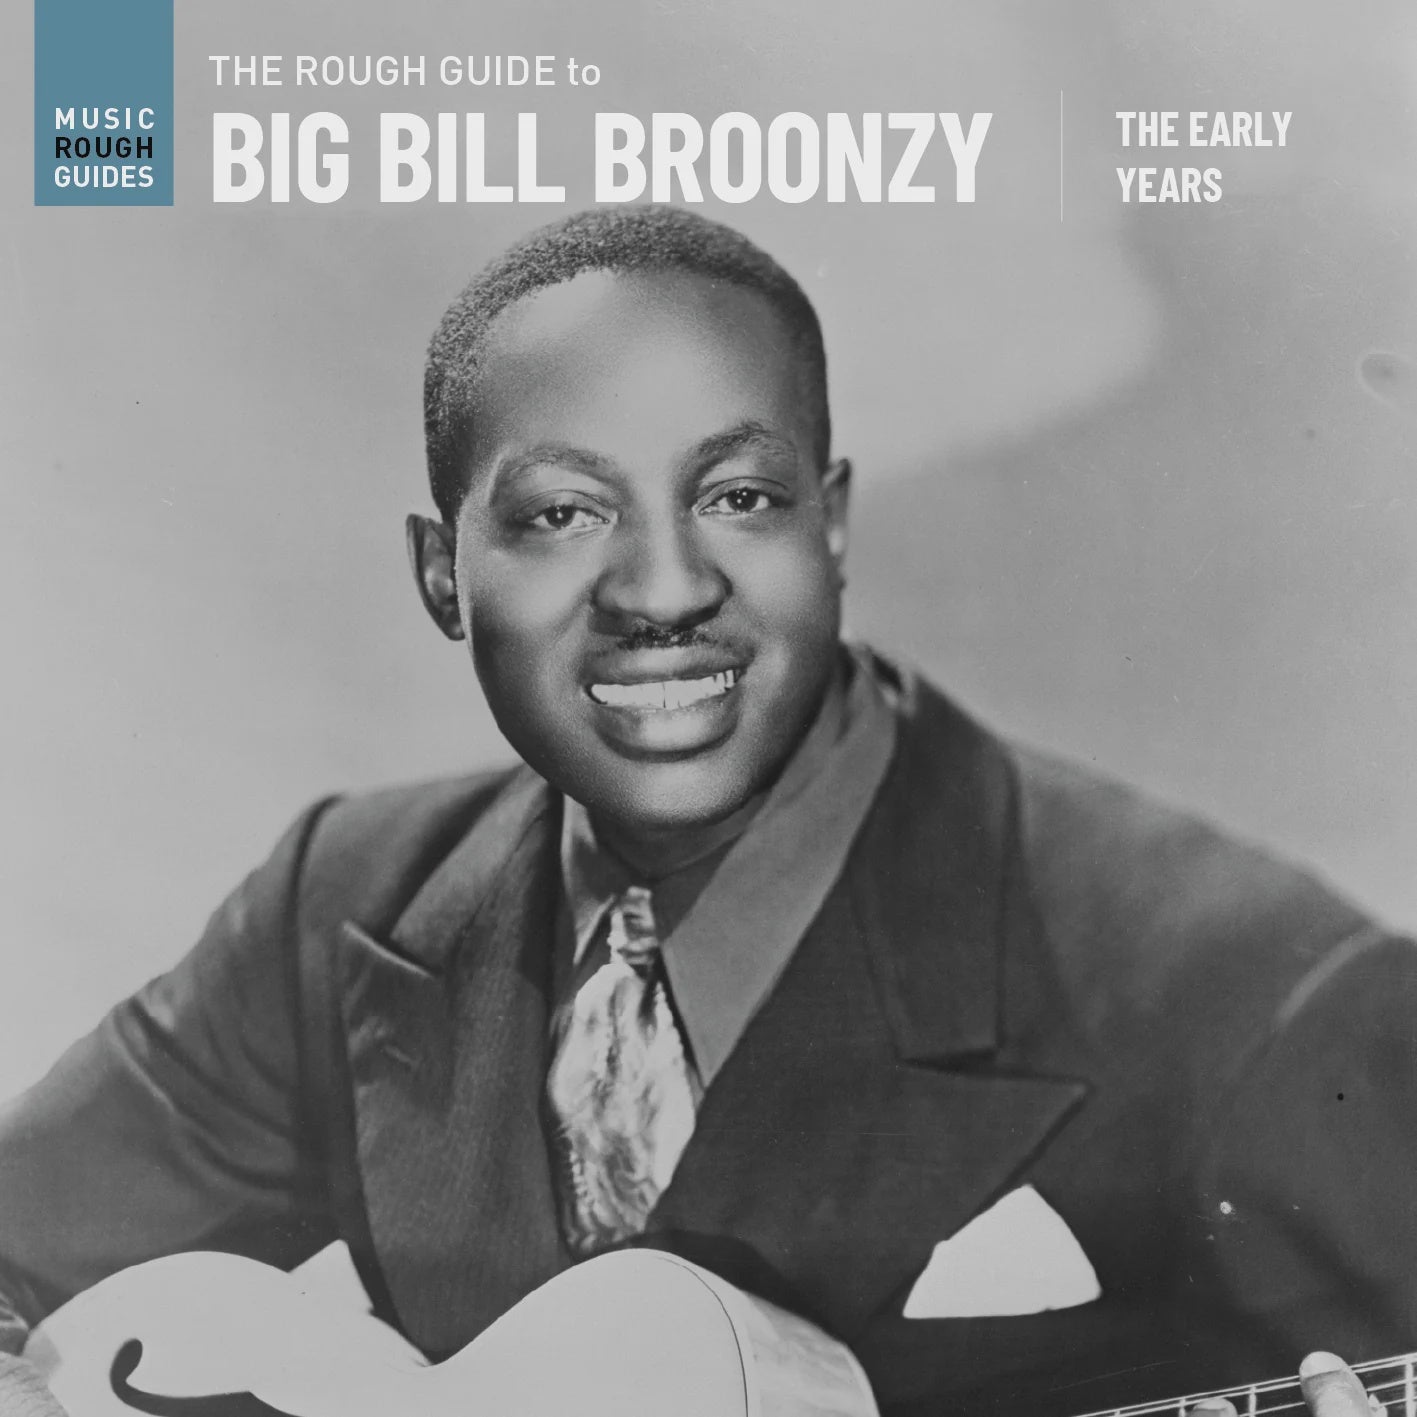 Big Bill Broonzy - The Rough Guide To Big Bill Broonzy: The Early Years - New LP Record 2023 World Music Network Vinyl - Chicago Blues